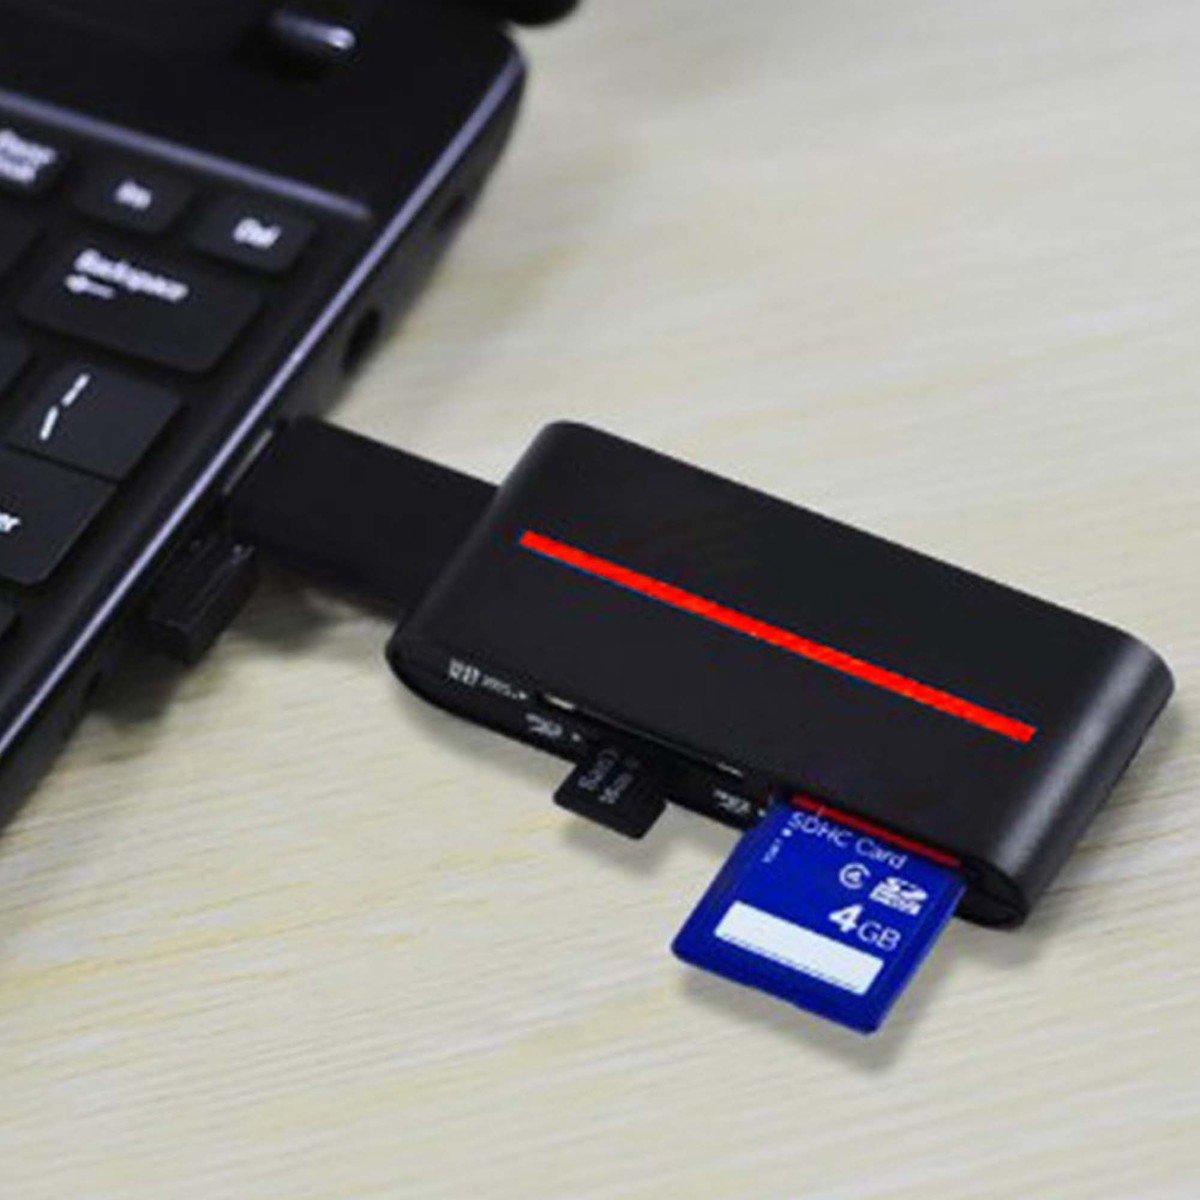 Trands All In One Card Reader With USB 3.0 Connector Cable CR9819